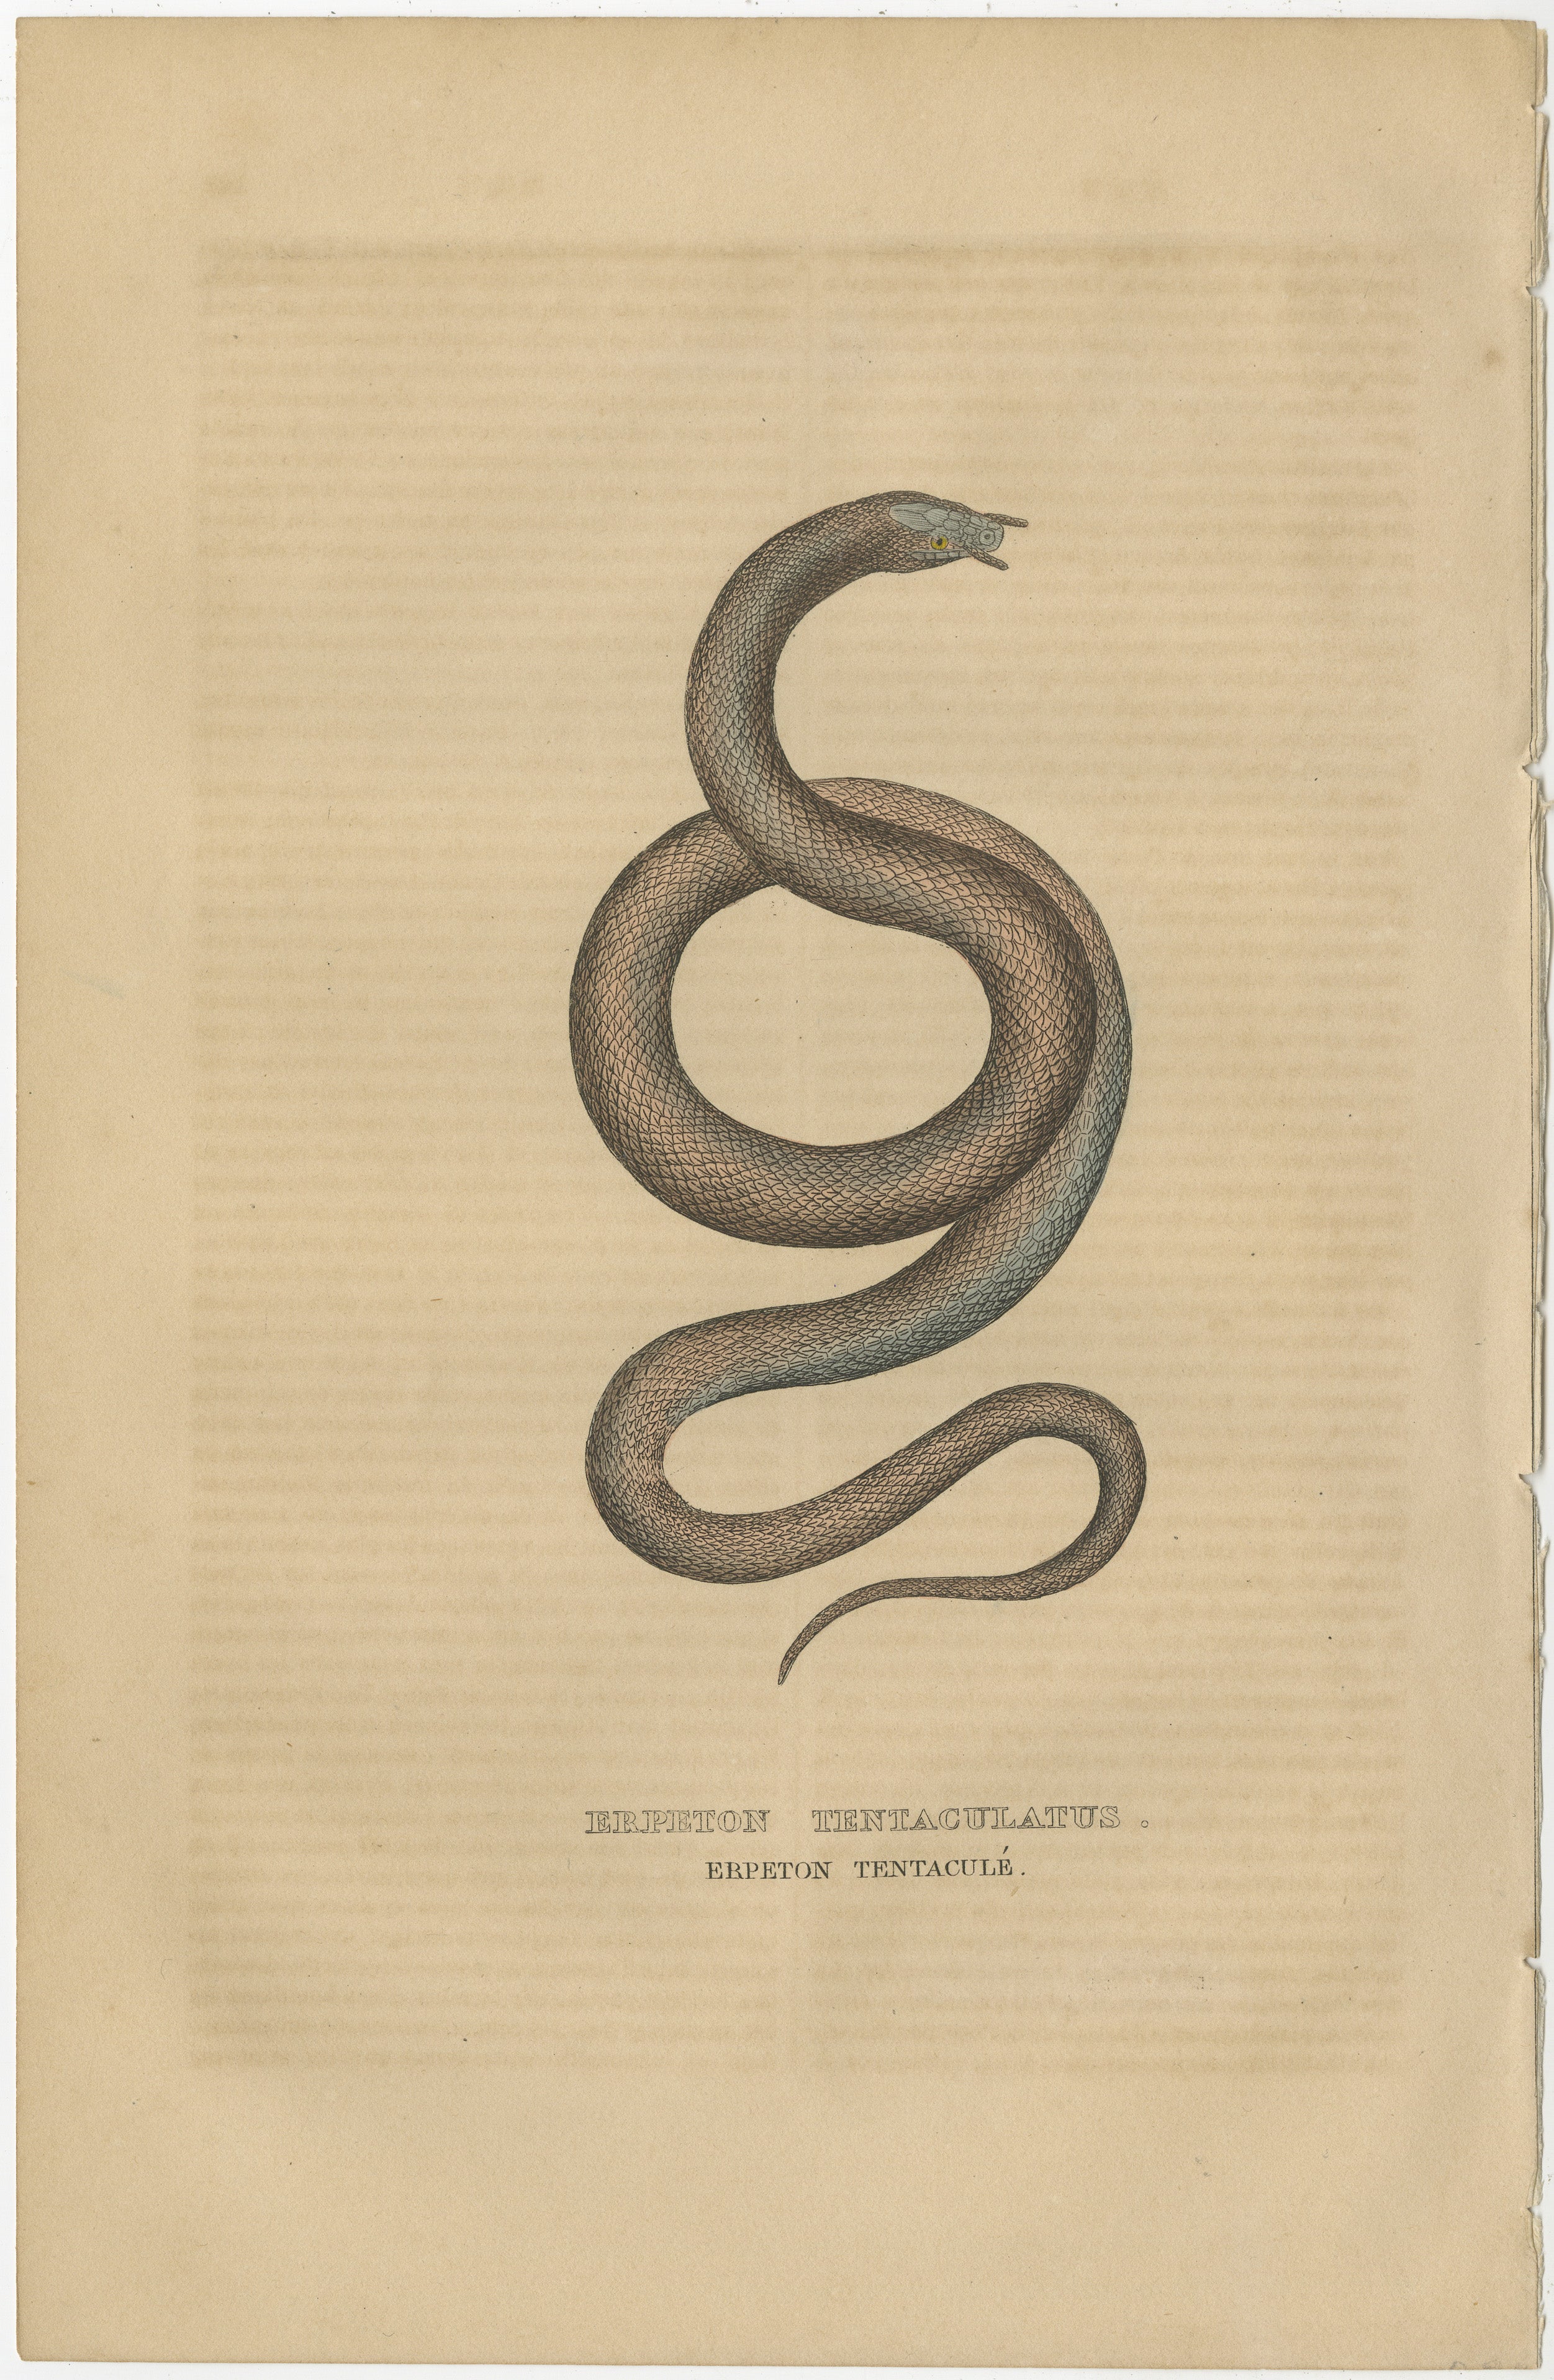 The image depicts a snake, specifically labeled as 